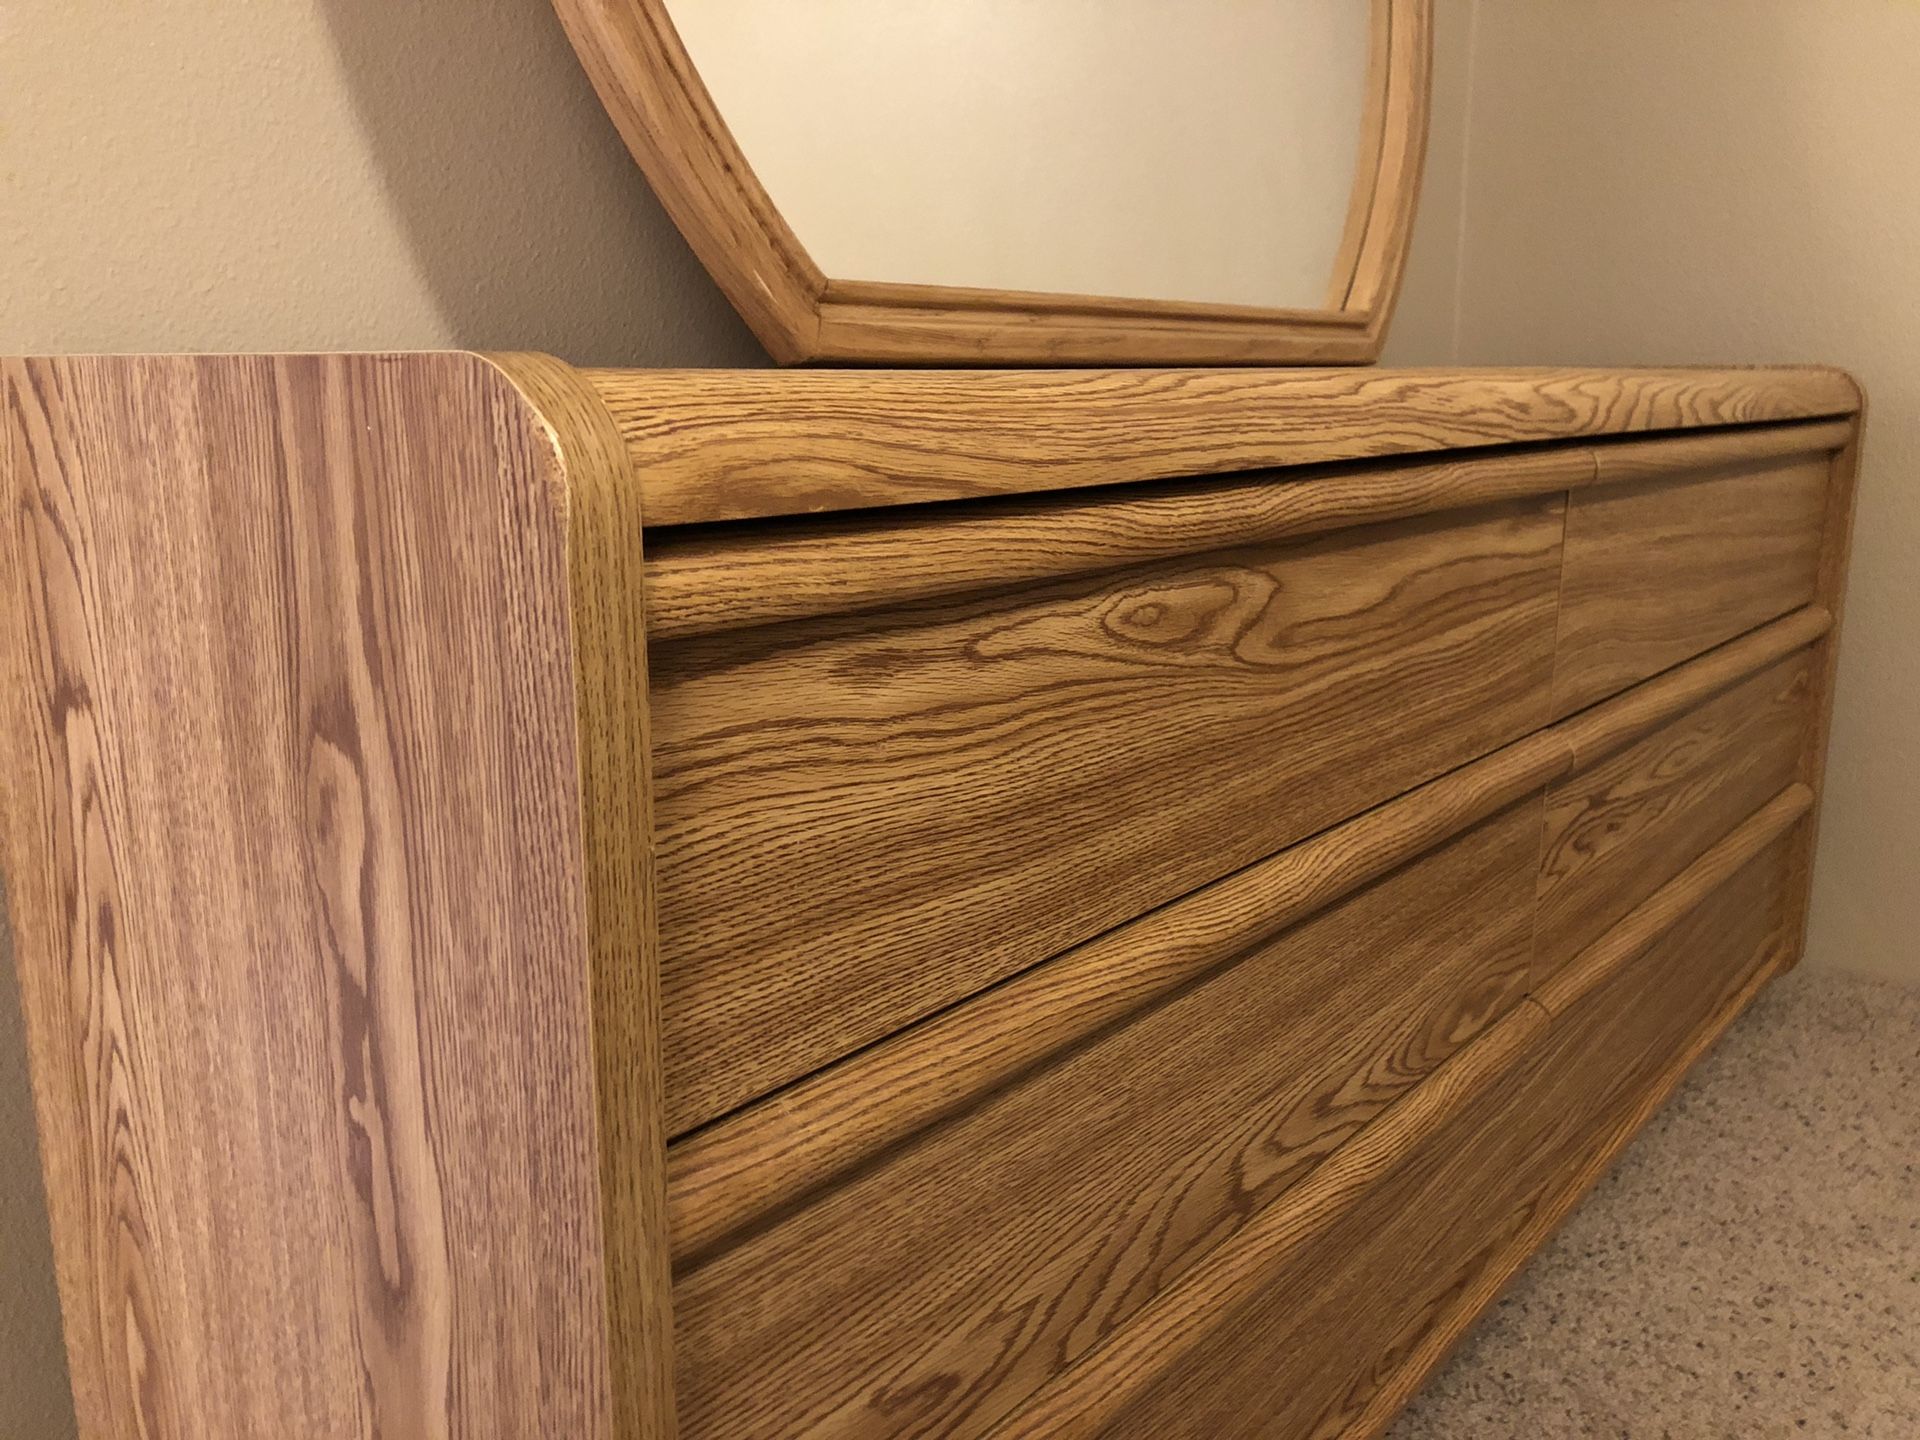 Bedroom Set (Dresser and two end tables) - No bed